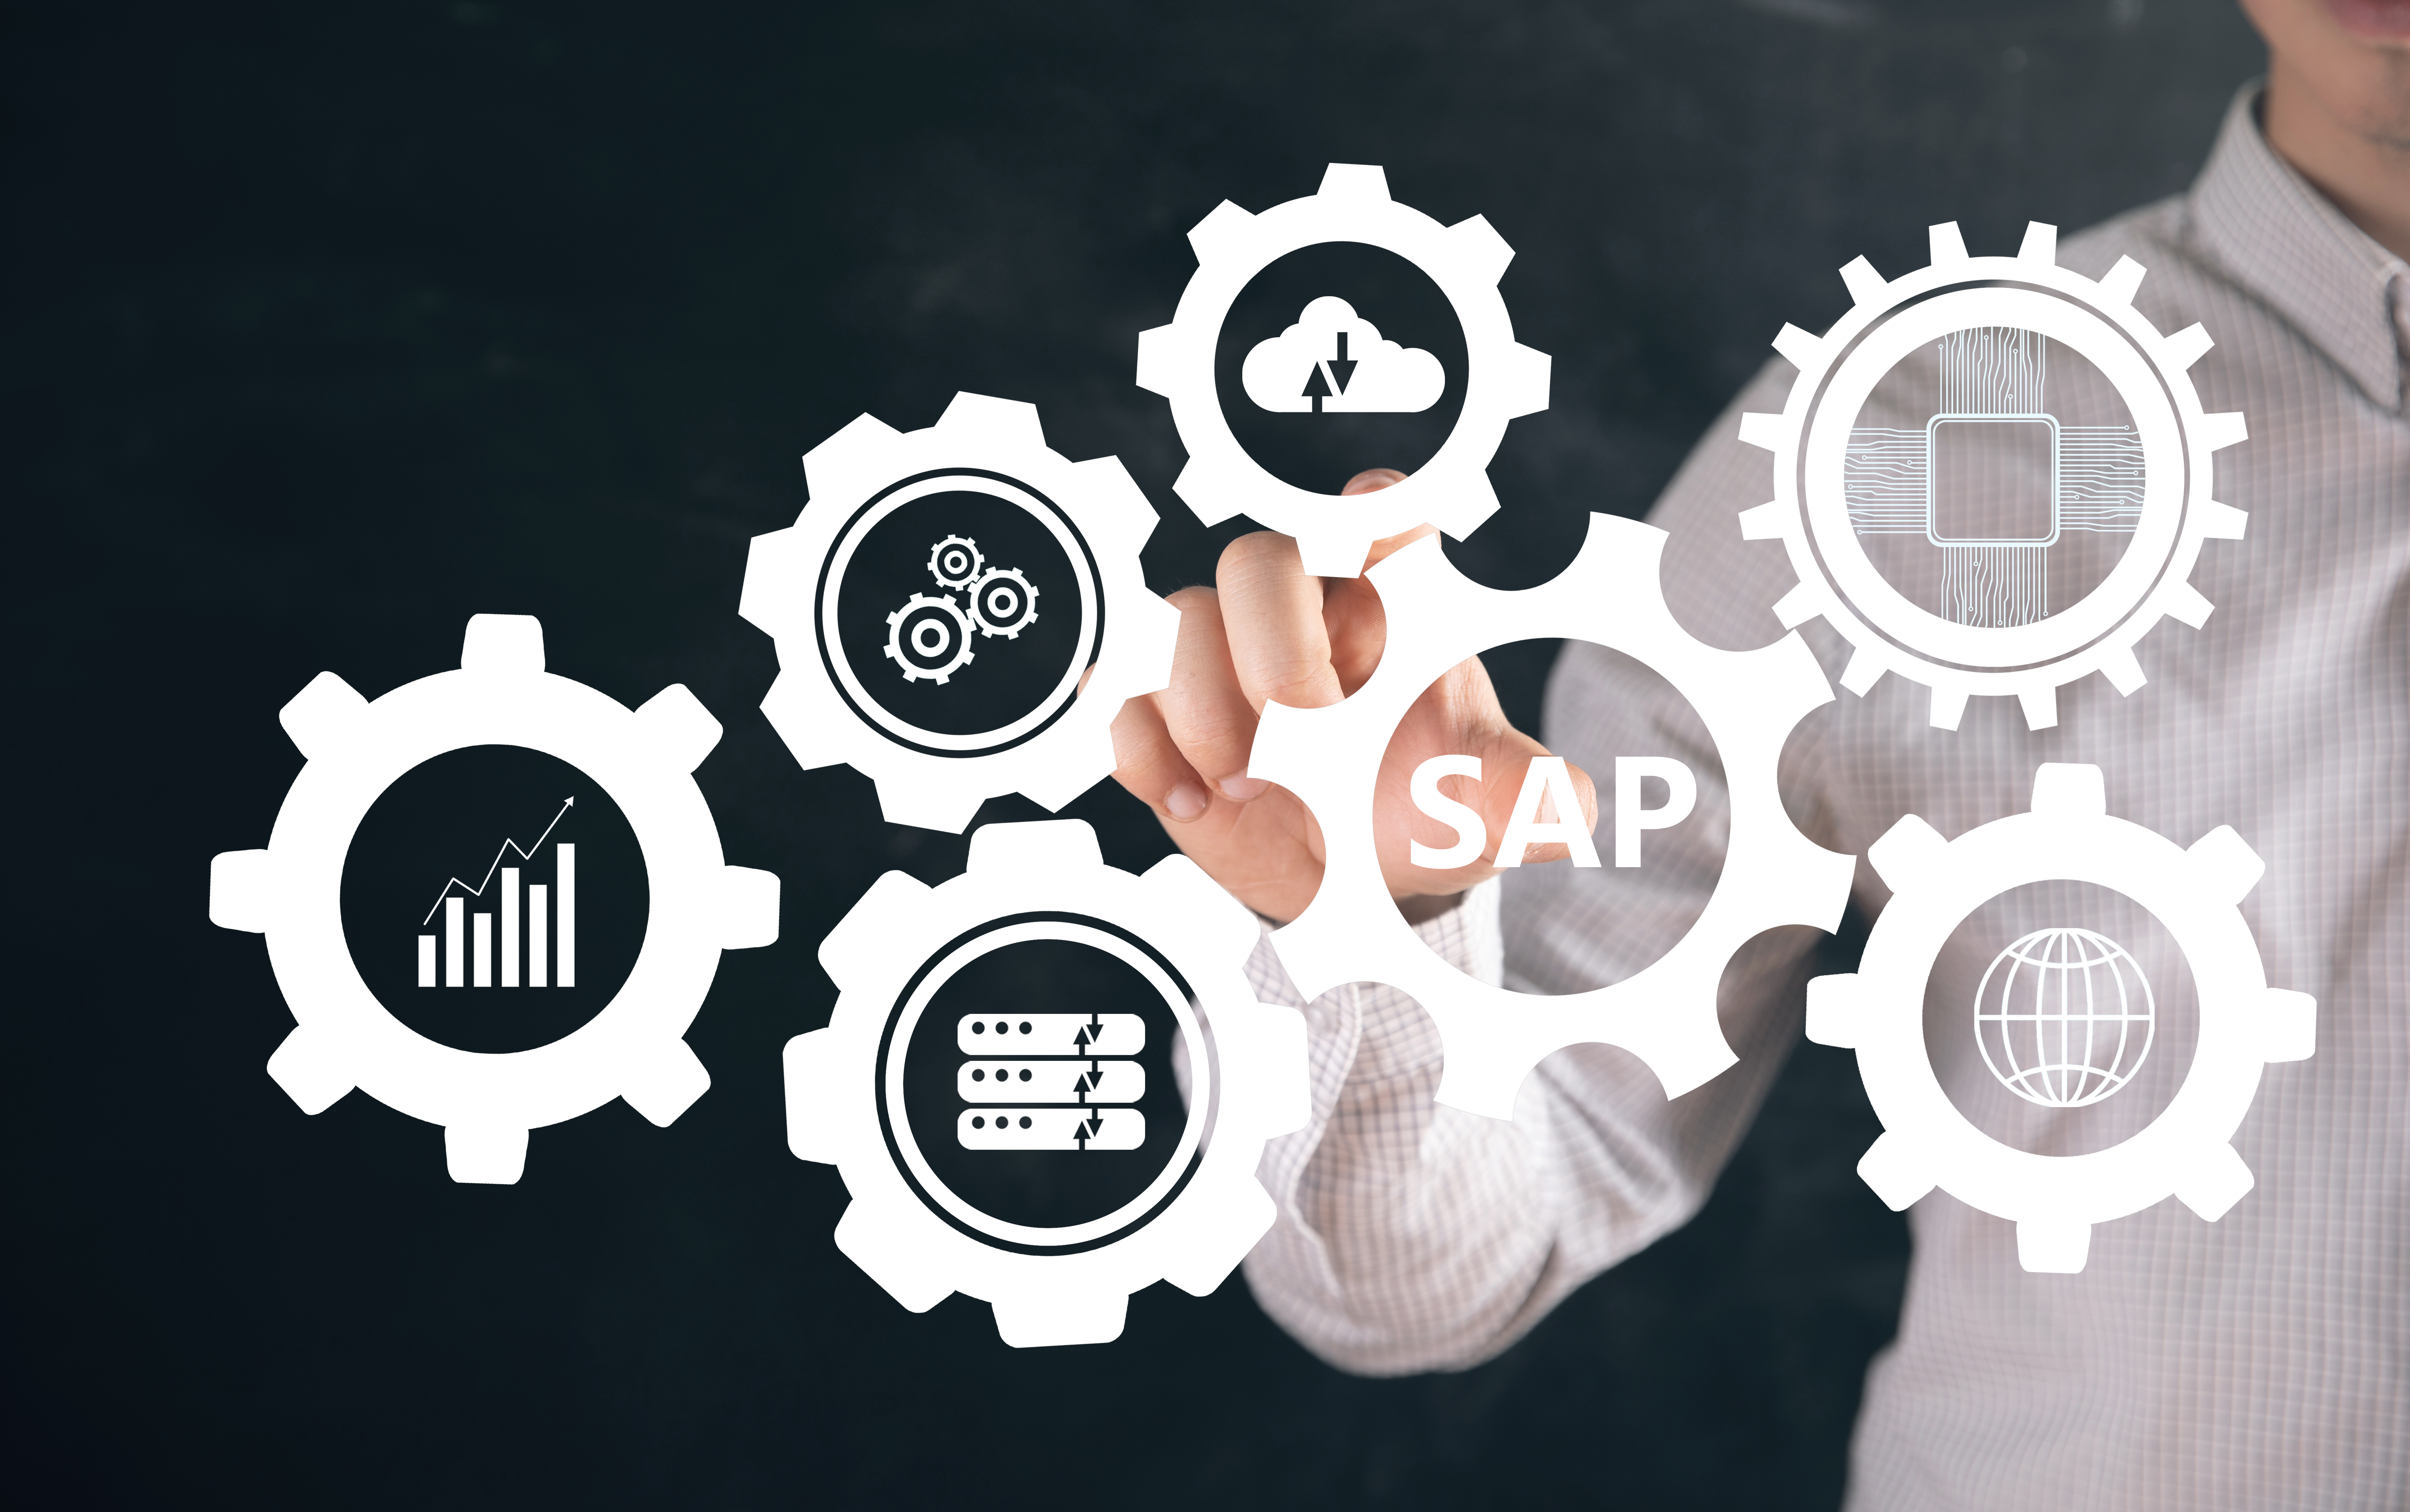 sap-gears-icons-man-tapping-screen